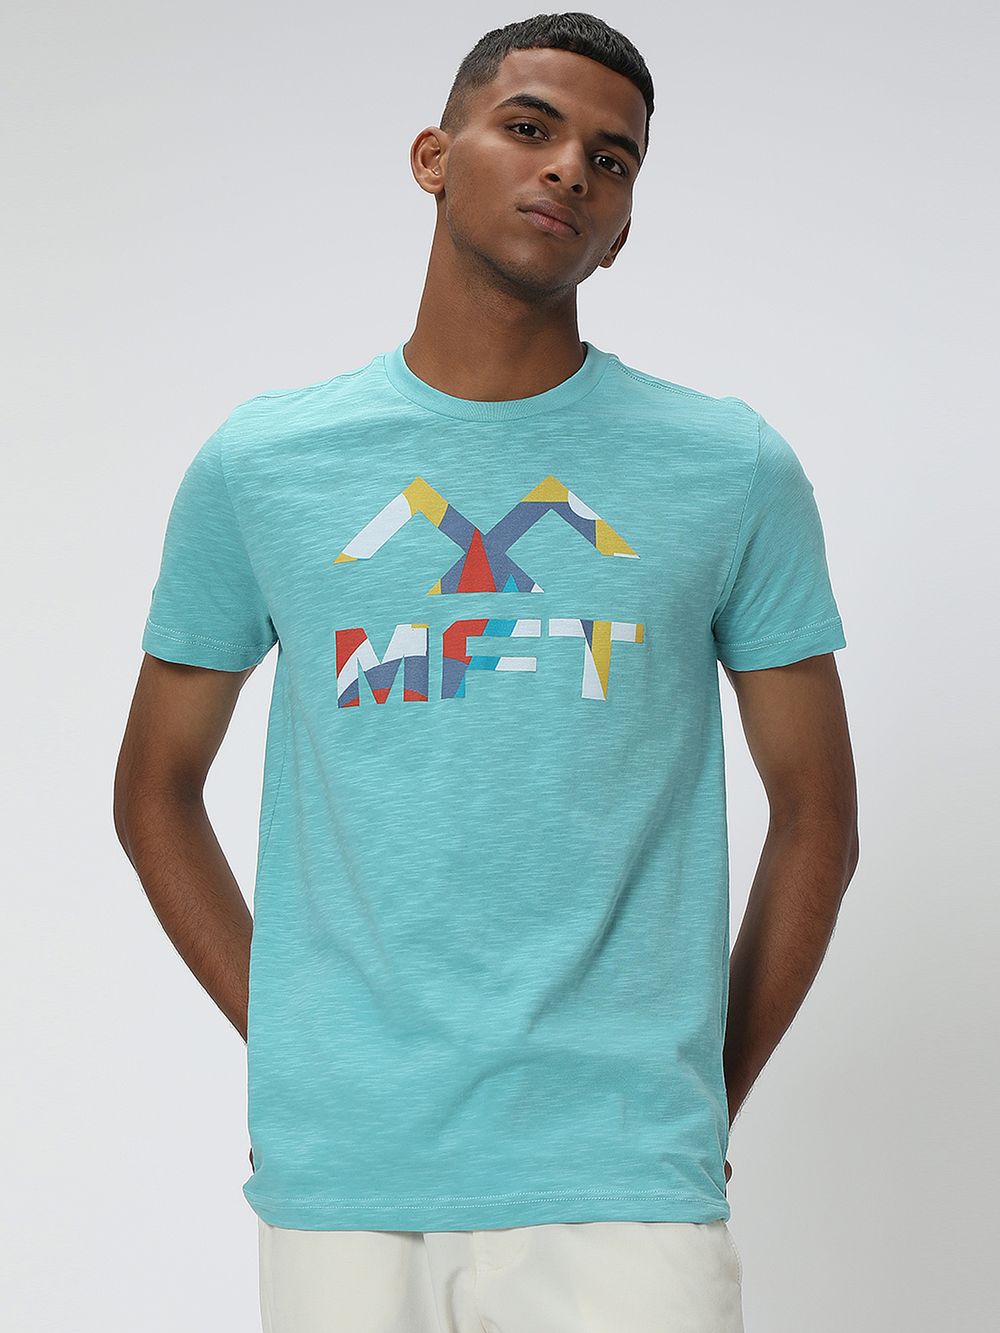 Turquoise & Multi Print Jersey Graphic T-Shirt